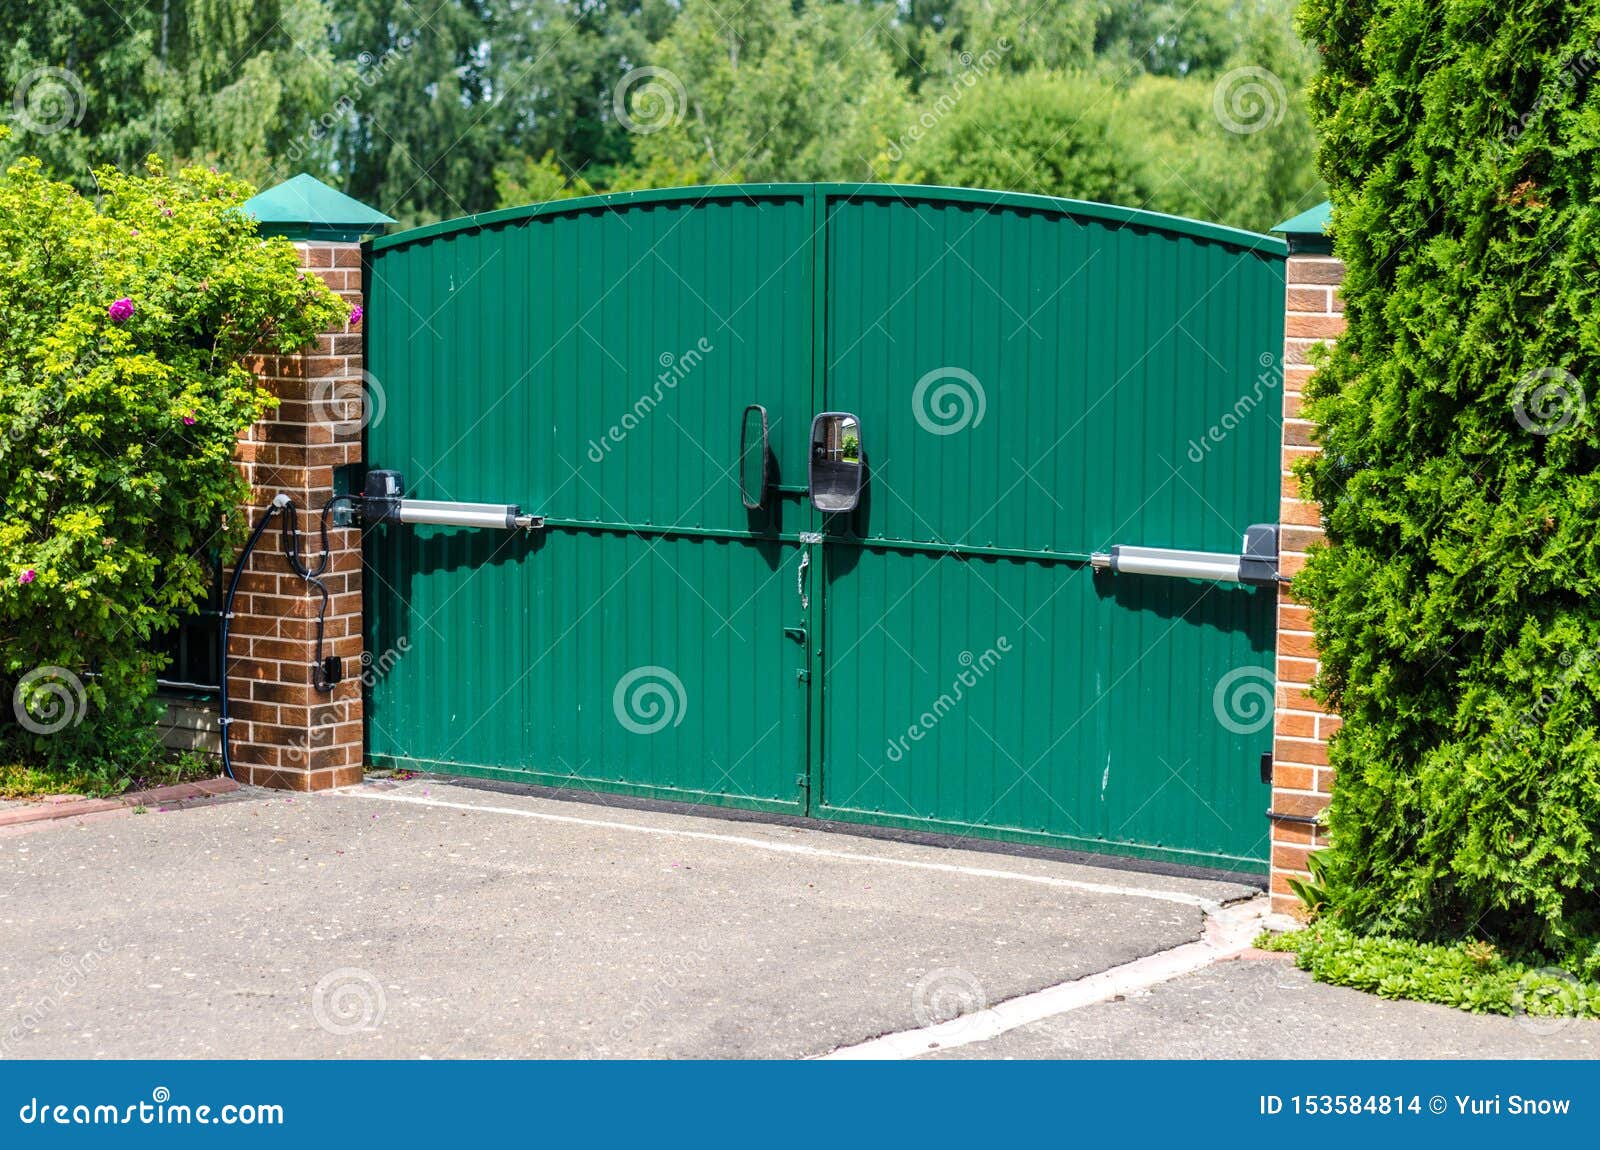 automatic electric gates in a private house